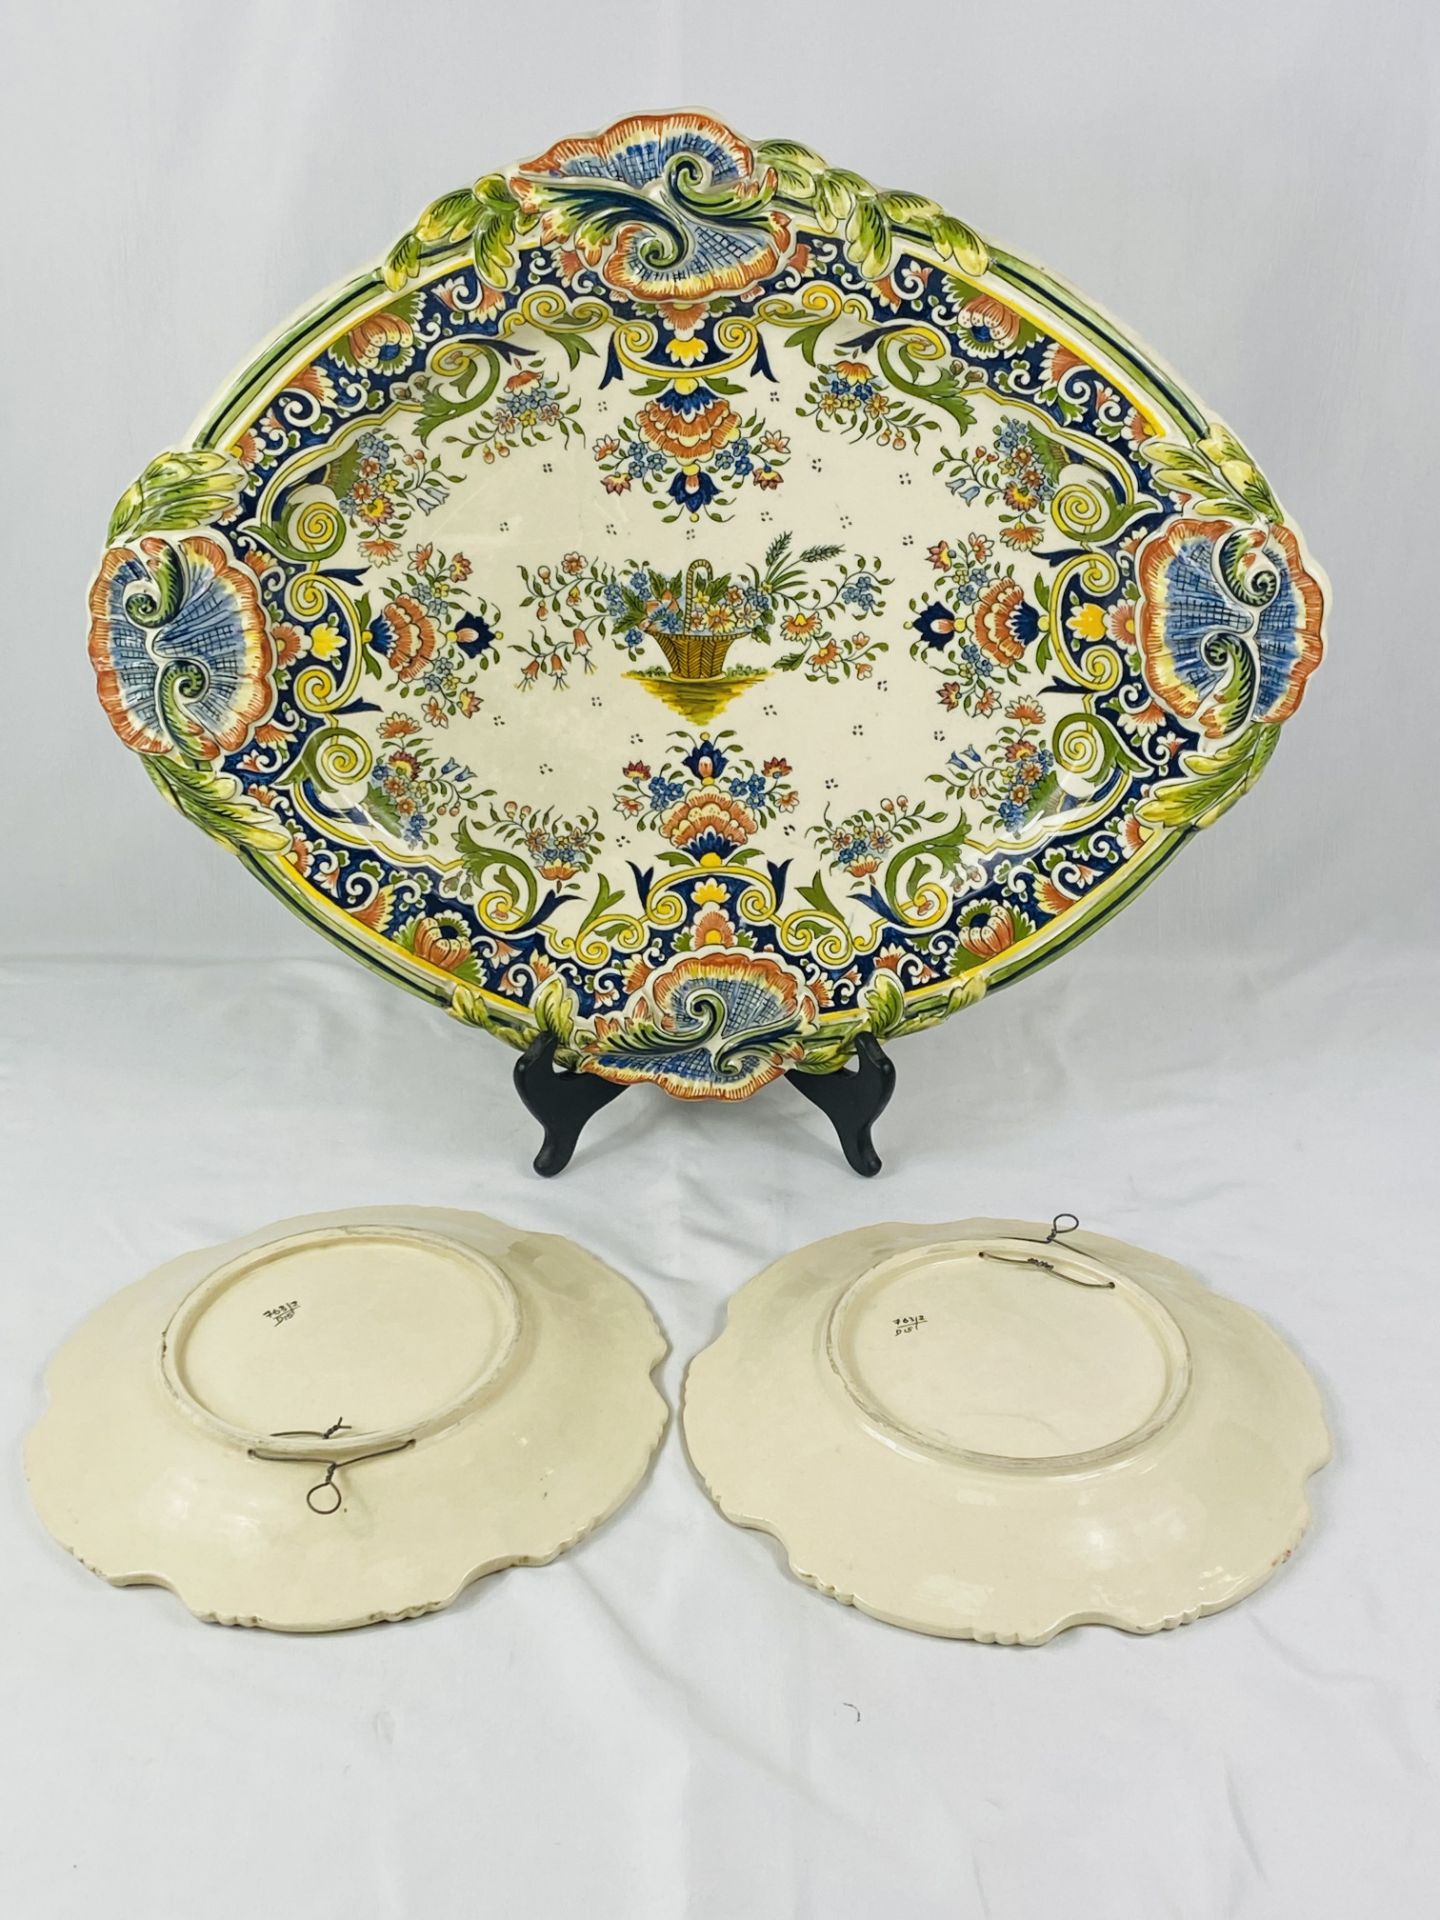 Majolica serving platter, 50cm; together with a pair of majolica plates. - Image 2 of 2